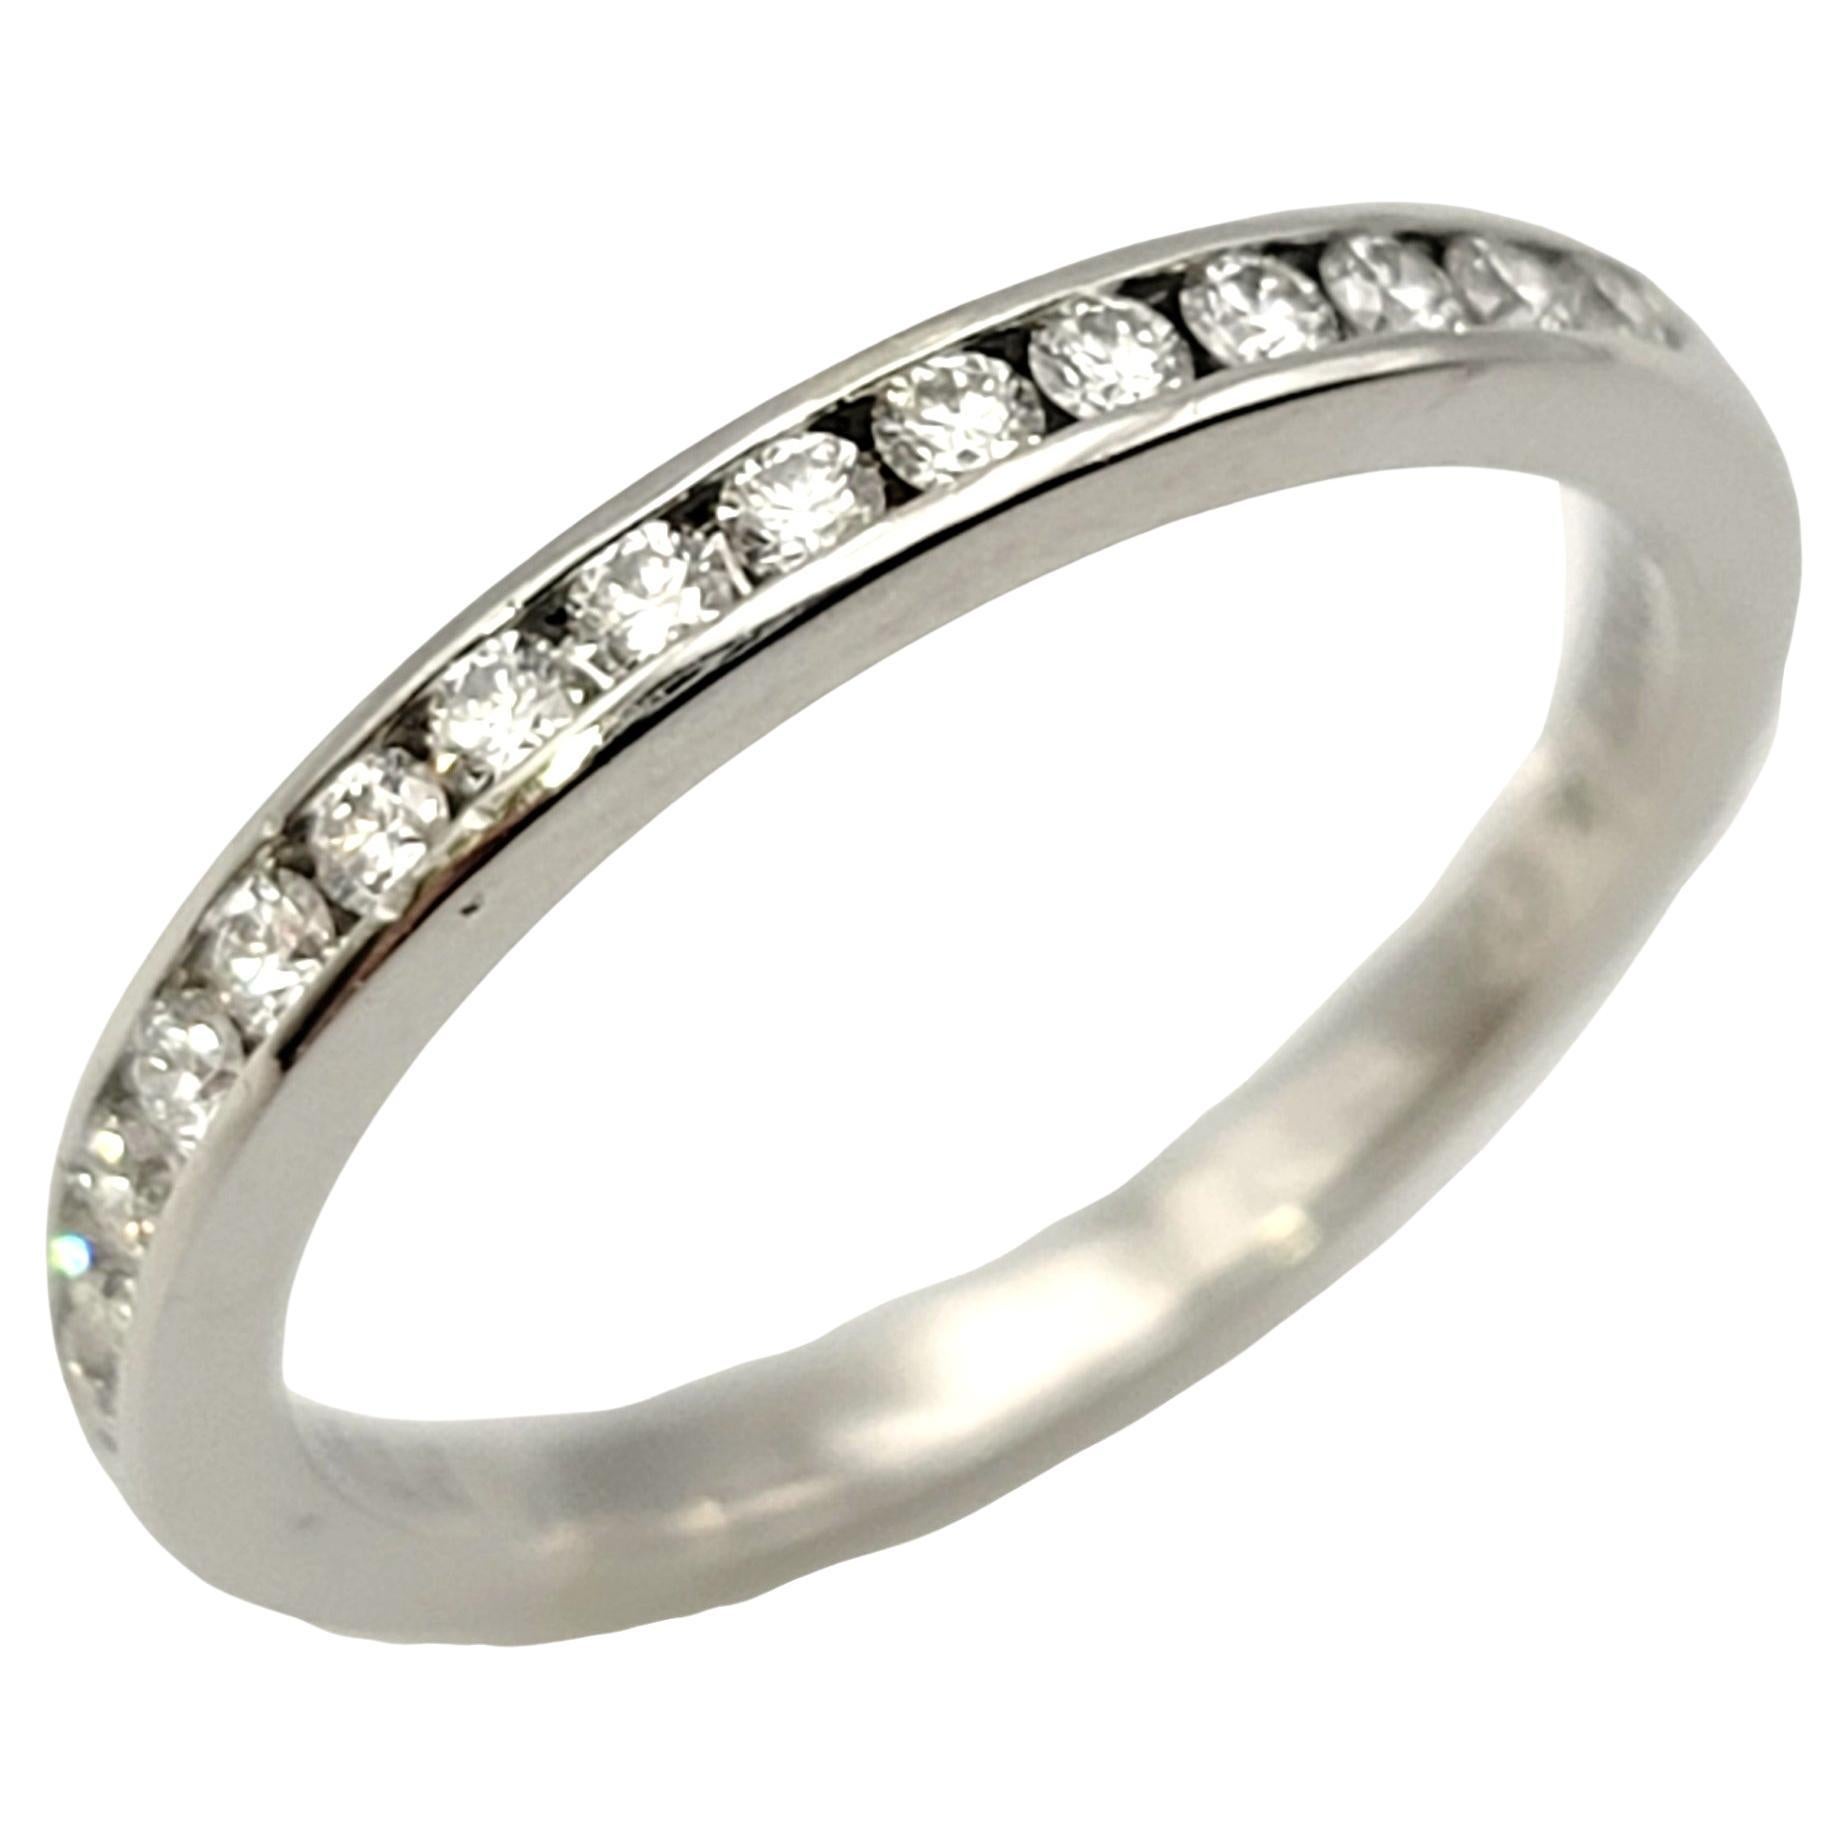 Ring size: 3.75

Stunning Tiffany & Co. diamond semi eternity band ring. This timeless beauty features 15 bright white diamonds set in a half circle in a highly polished platinum setting. The platinum really enhances the white brilliance of the